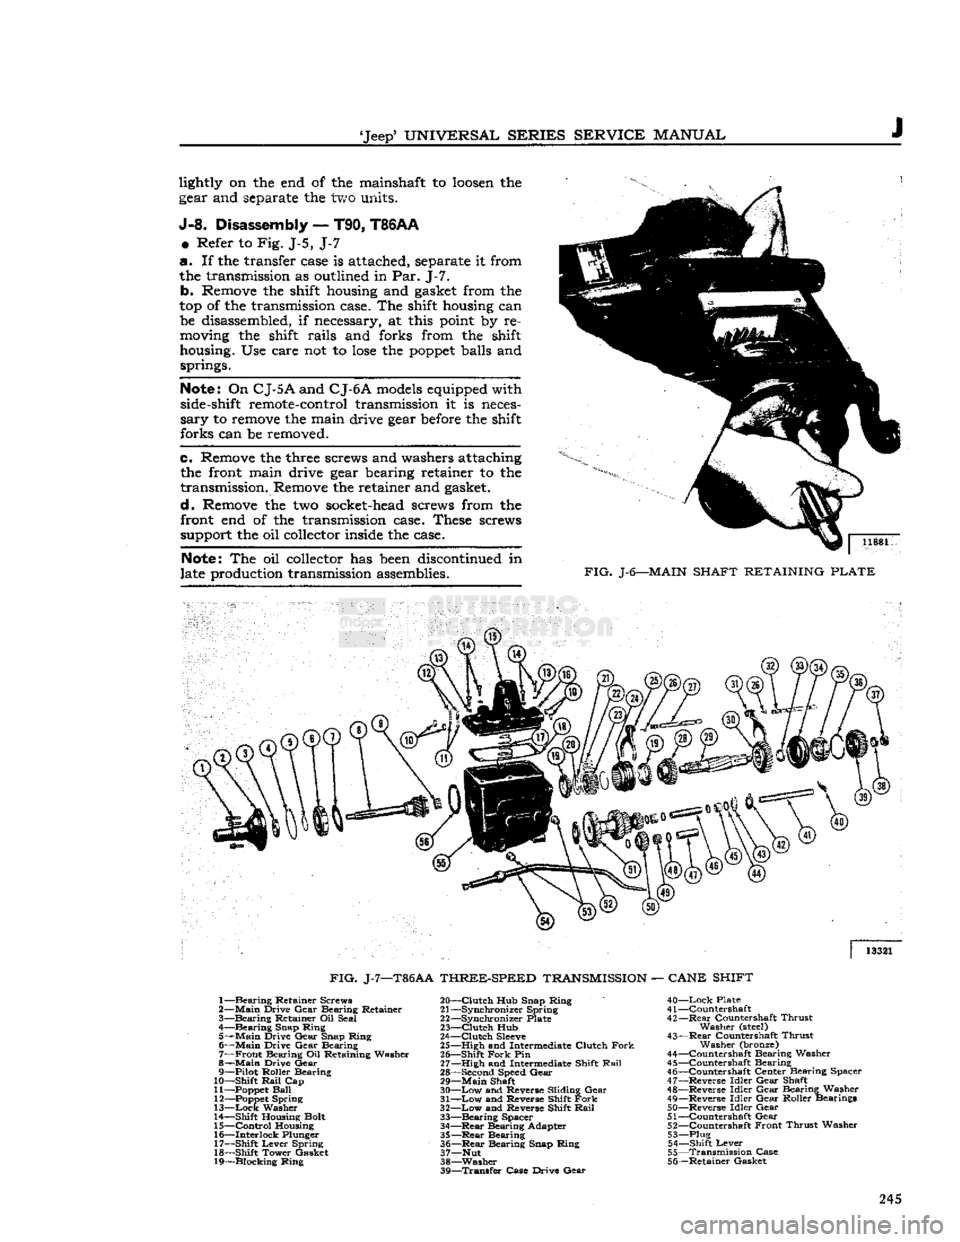 JEEP DJ 1953  Service Manual 
Jeep*
 UNIVERSAL
 SERIES
 SERVICE
 MANUAL 

lightly
 on the end of the
 mainshaft
 to
 loosen
 the 

gear
 and
 separate
 the two
 units. 

J-8.
 Disassembly
 —
 T90,
 T86AA 
 ®
 Refer to Fig. J